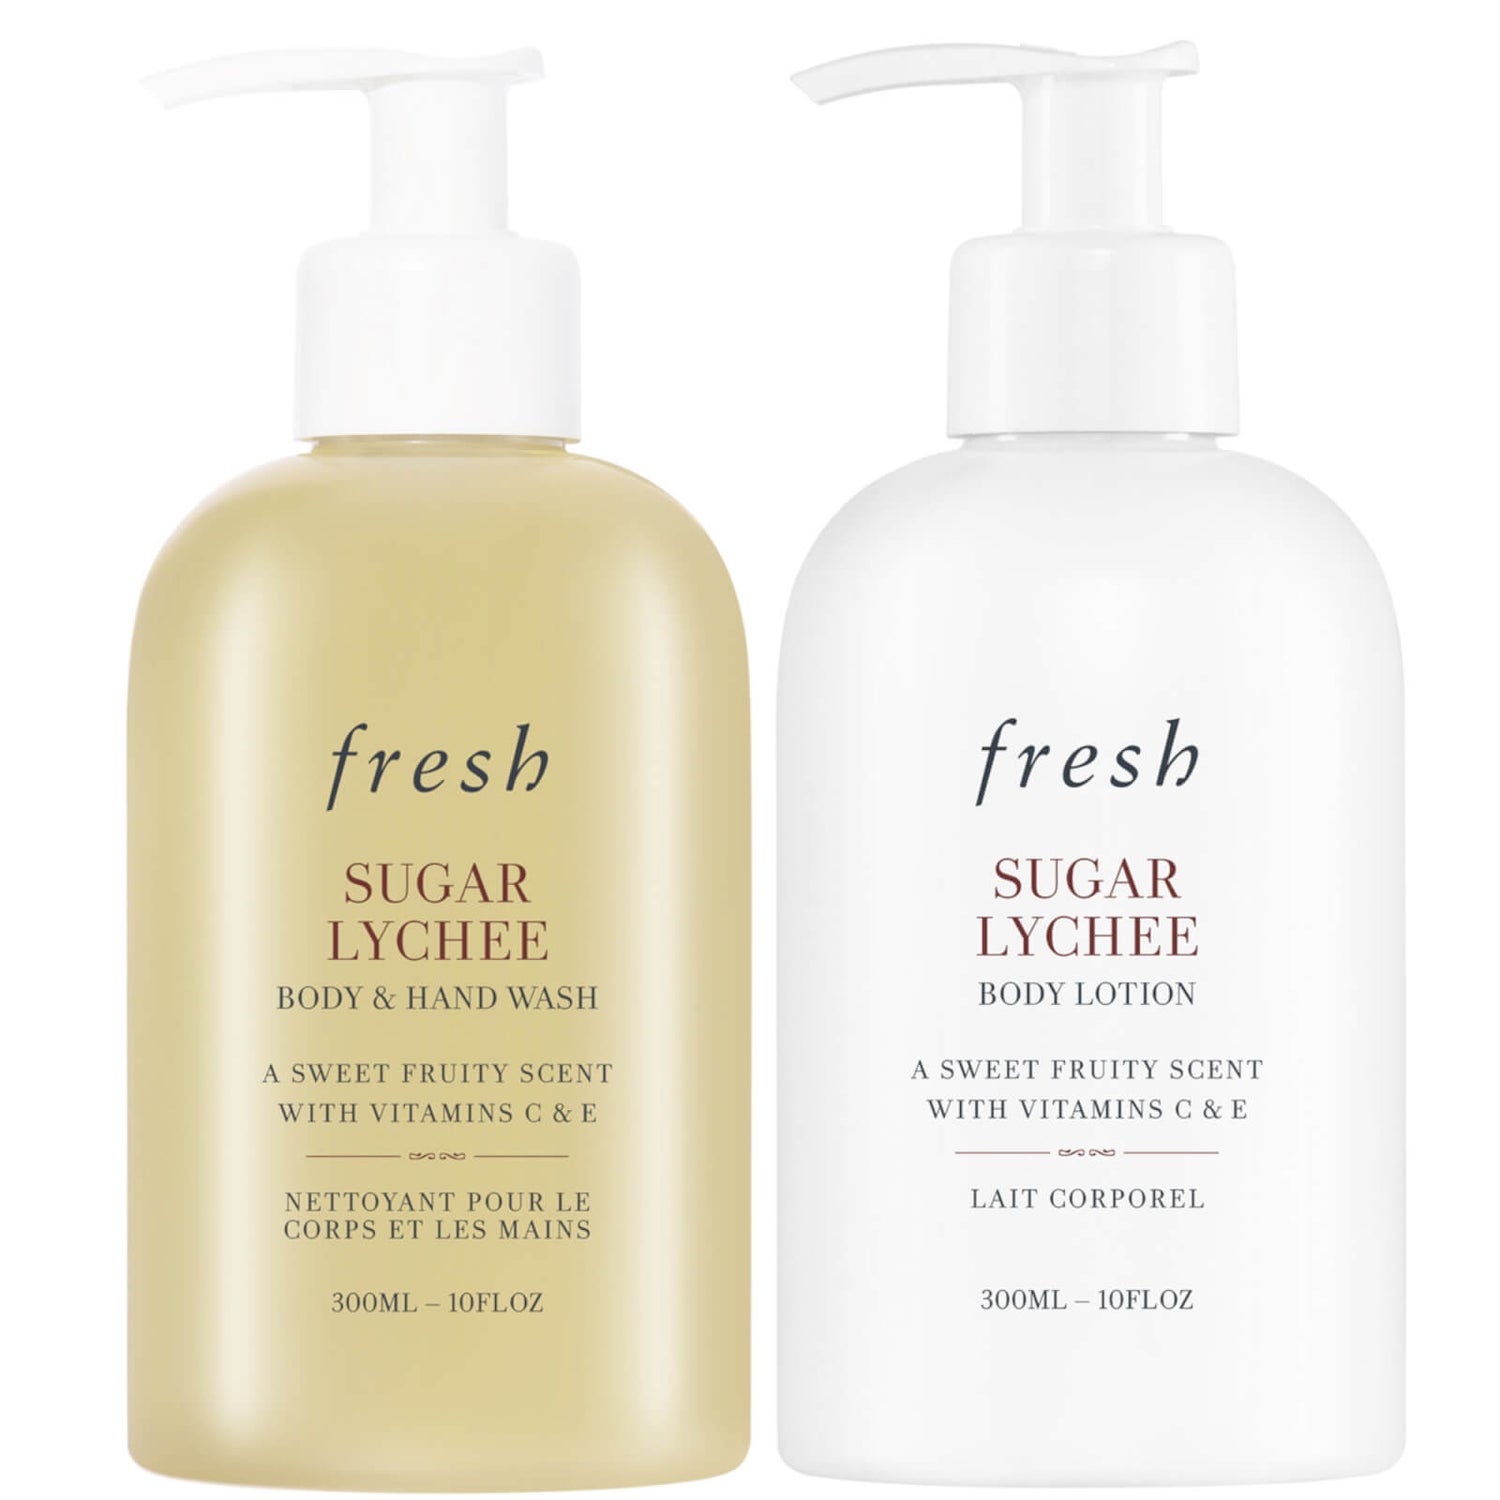 Fresh Sugar Lychee Body Lotion and Body and Hand Wash 300ml Duo (Worth £51.00)